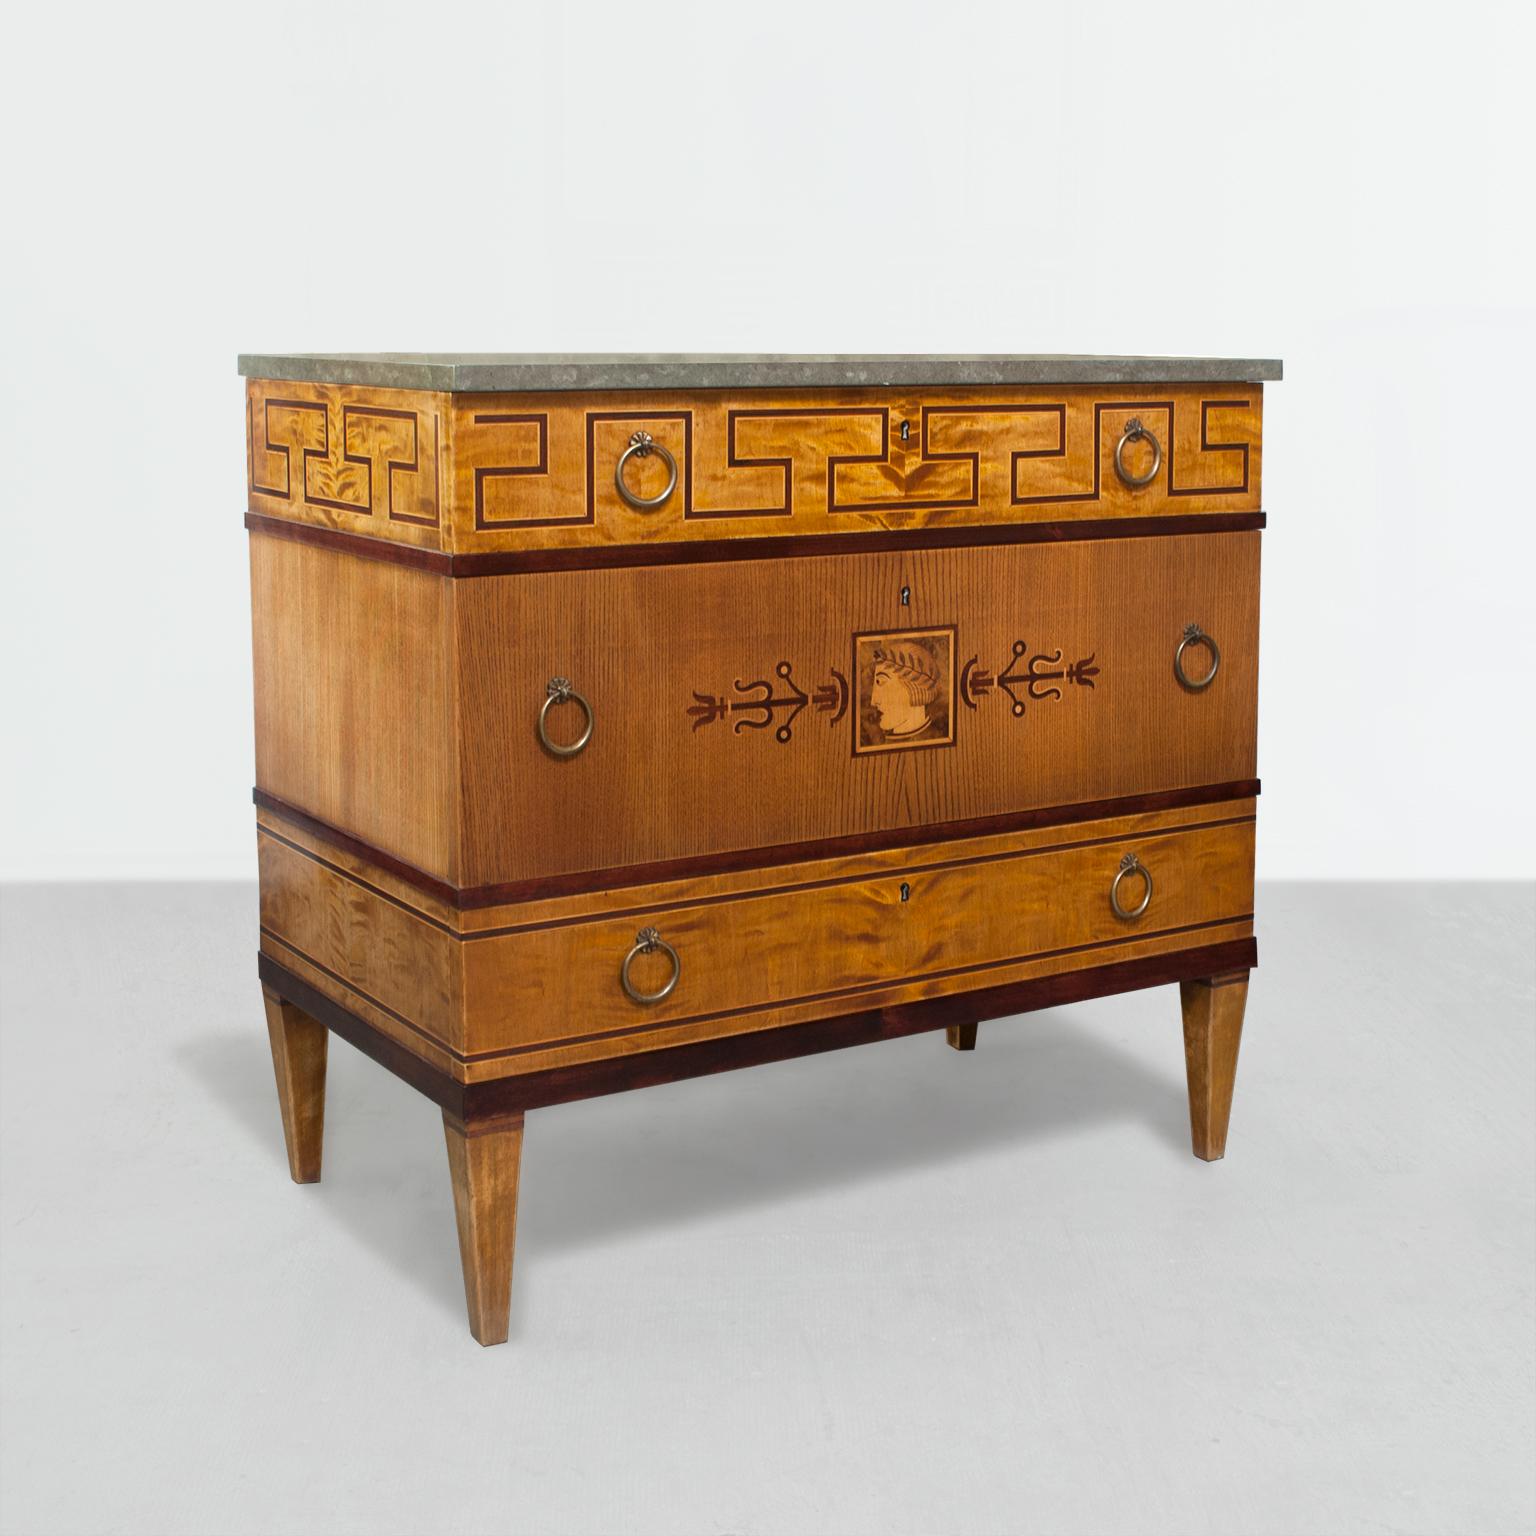 An elegant Swedish Art Deco 3-drawer marquetry chest of drawers with limestone top. The chest's upper section is detailed with a stylized meander design which wraps to the sides. The center drawer references classicism with a man's profile framed by